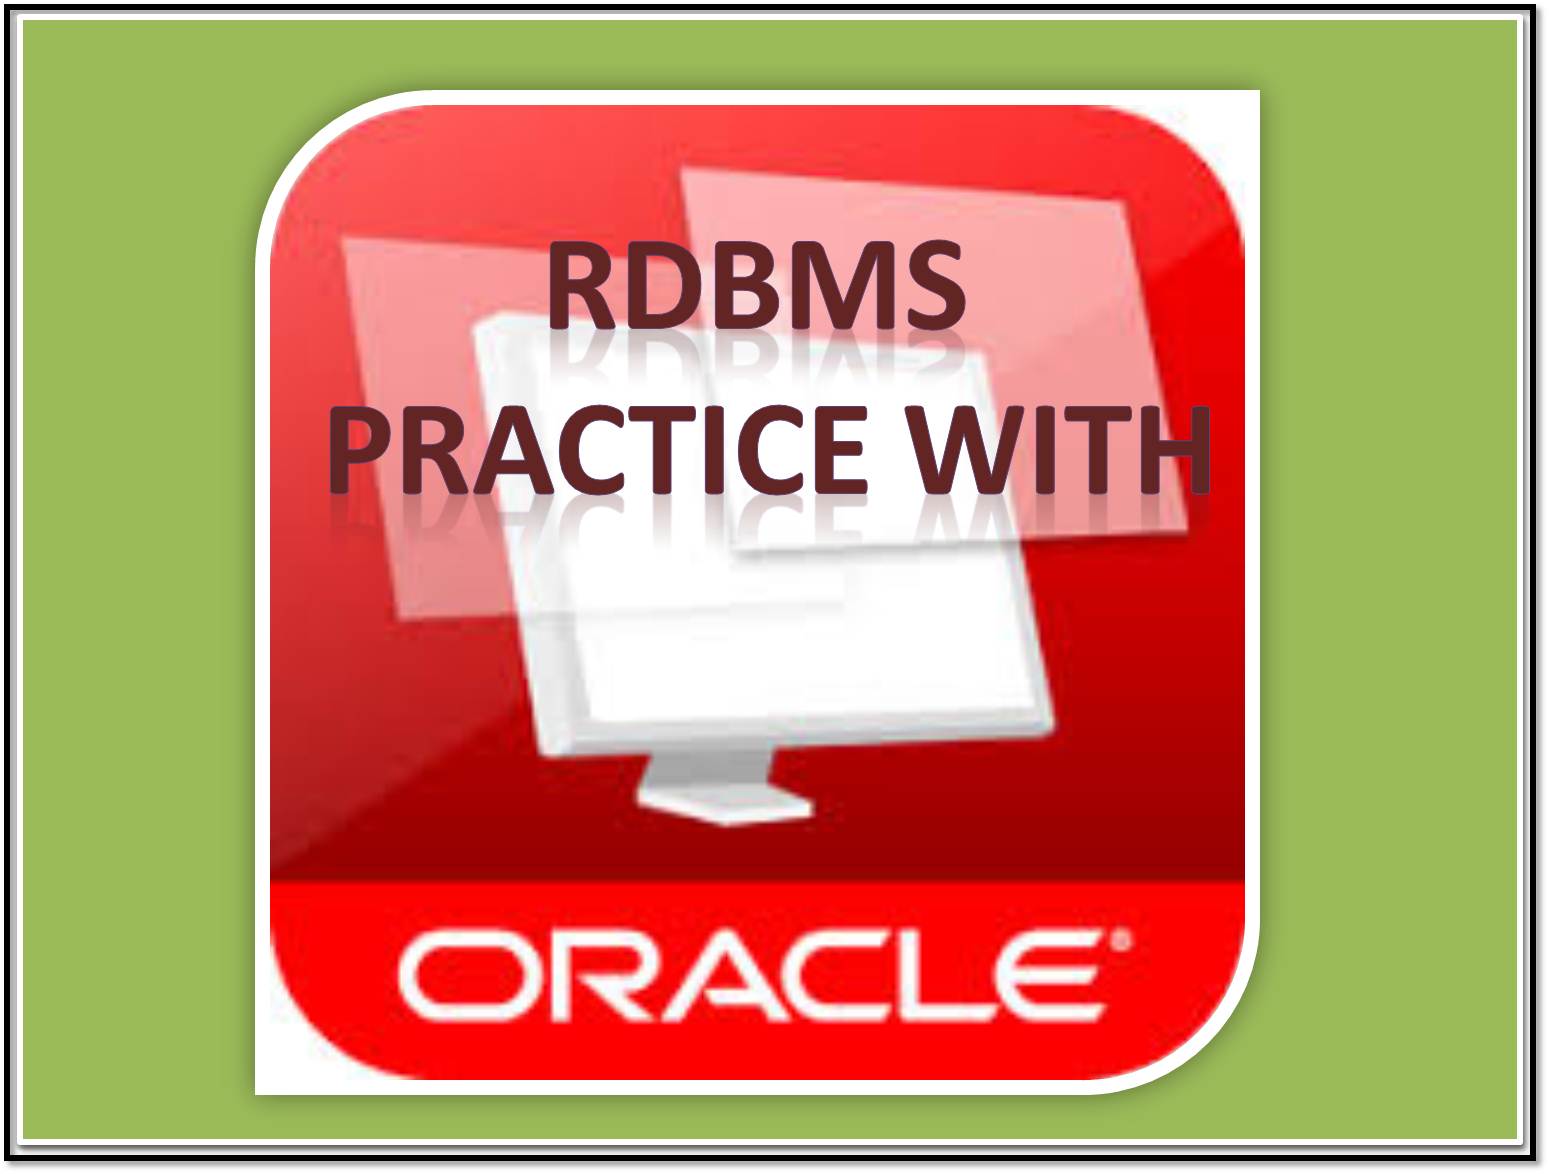 http://study.aisectonline.com/images/RDBMS Practice with Oracle.jpg